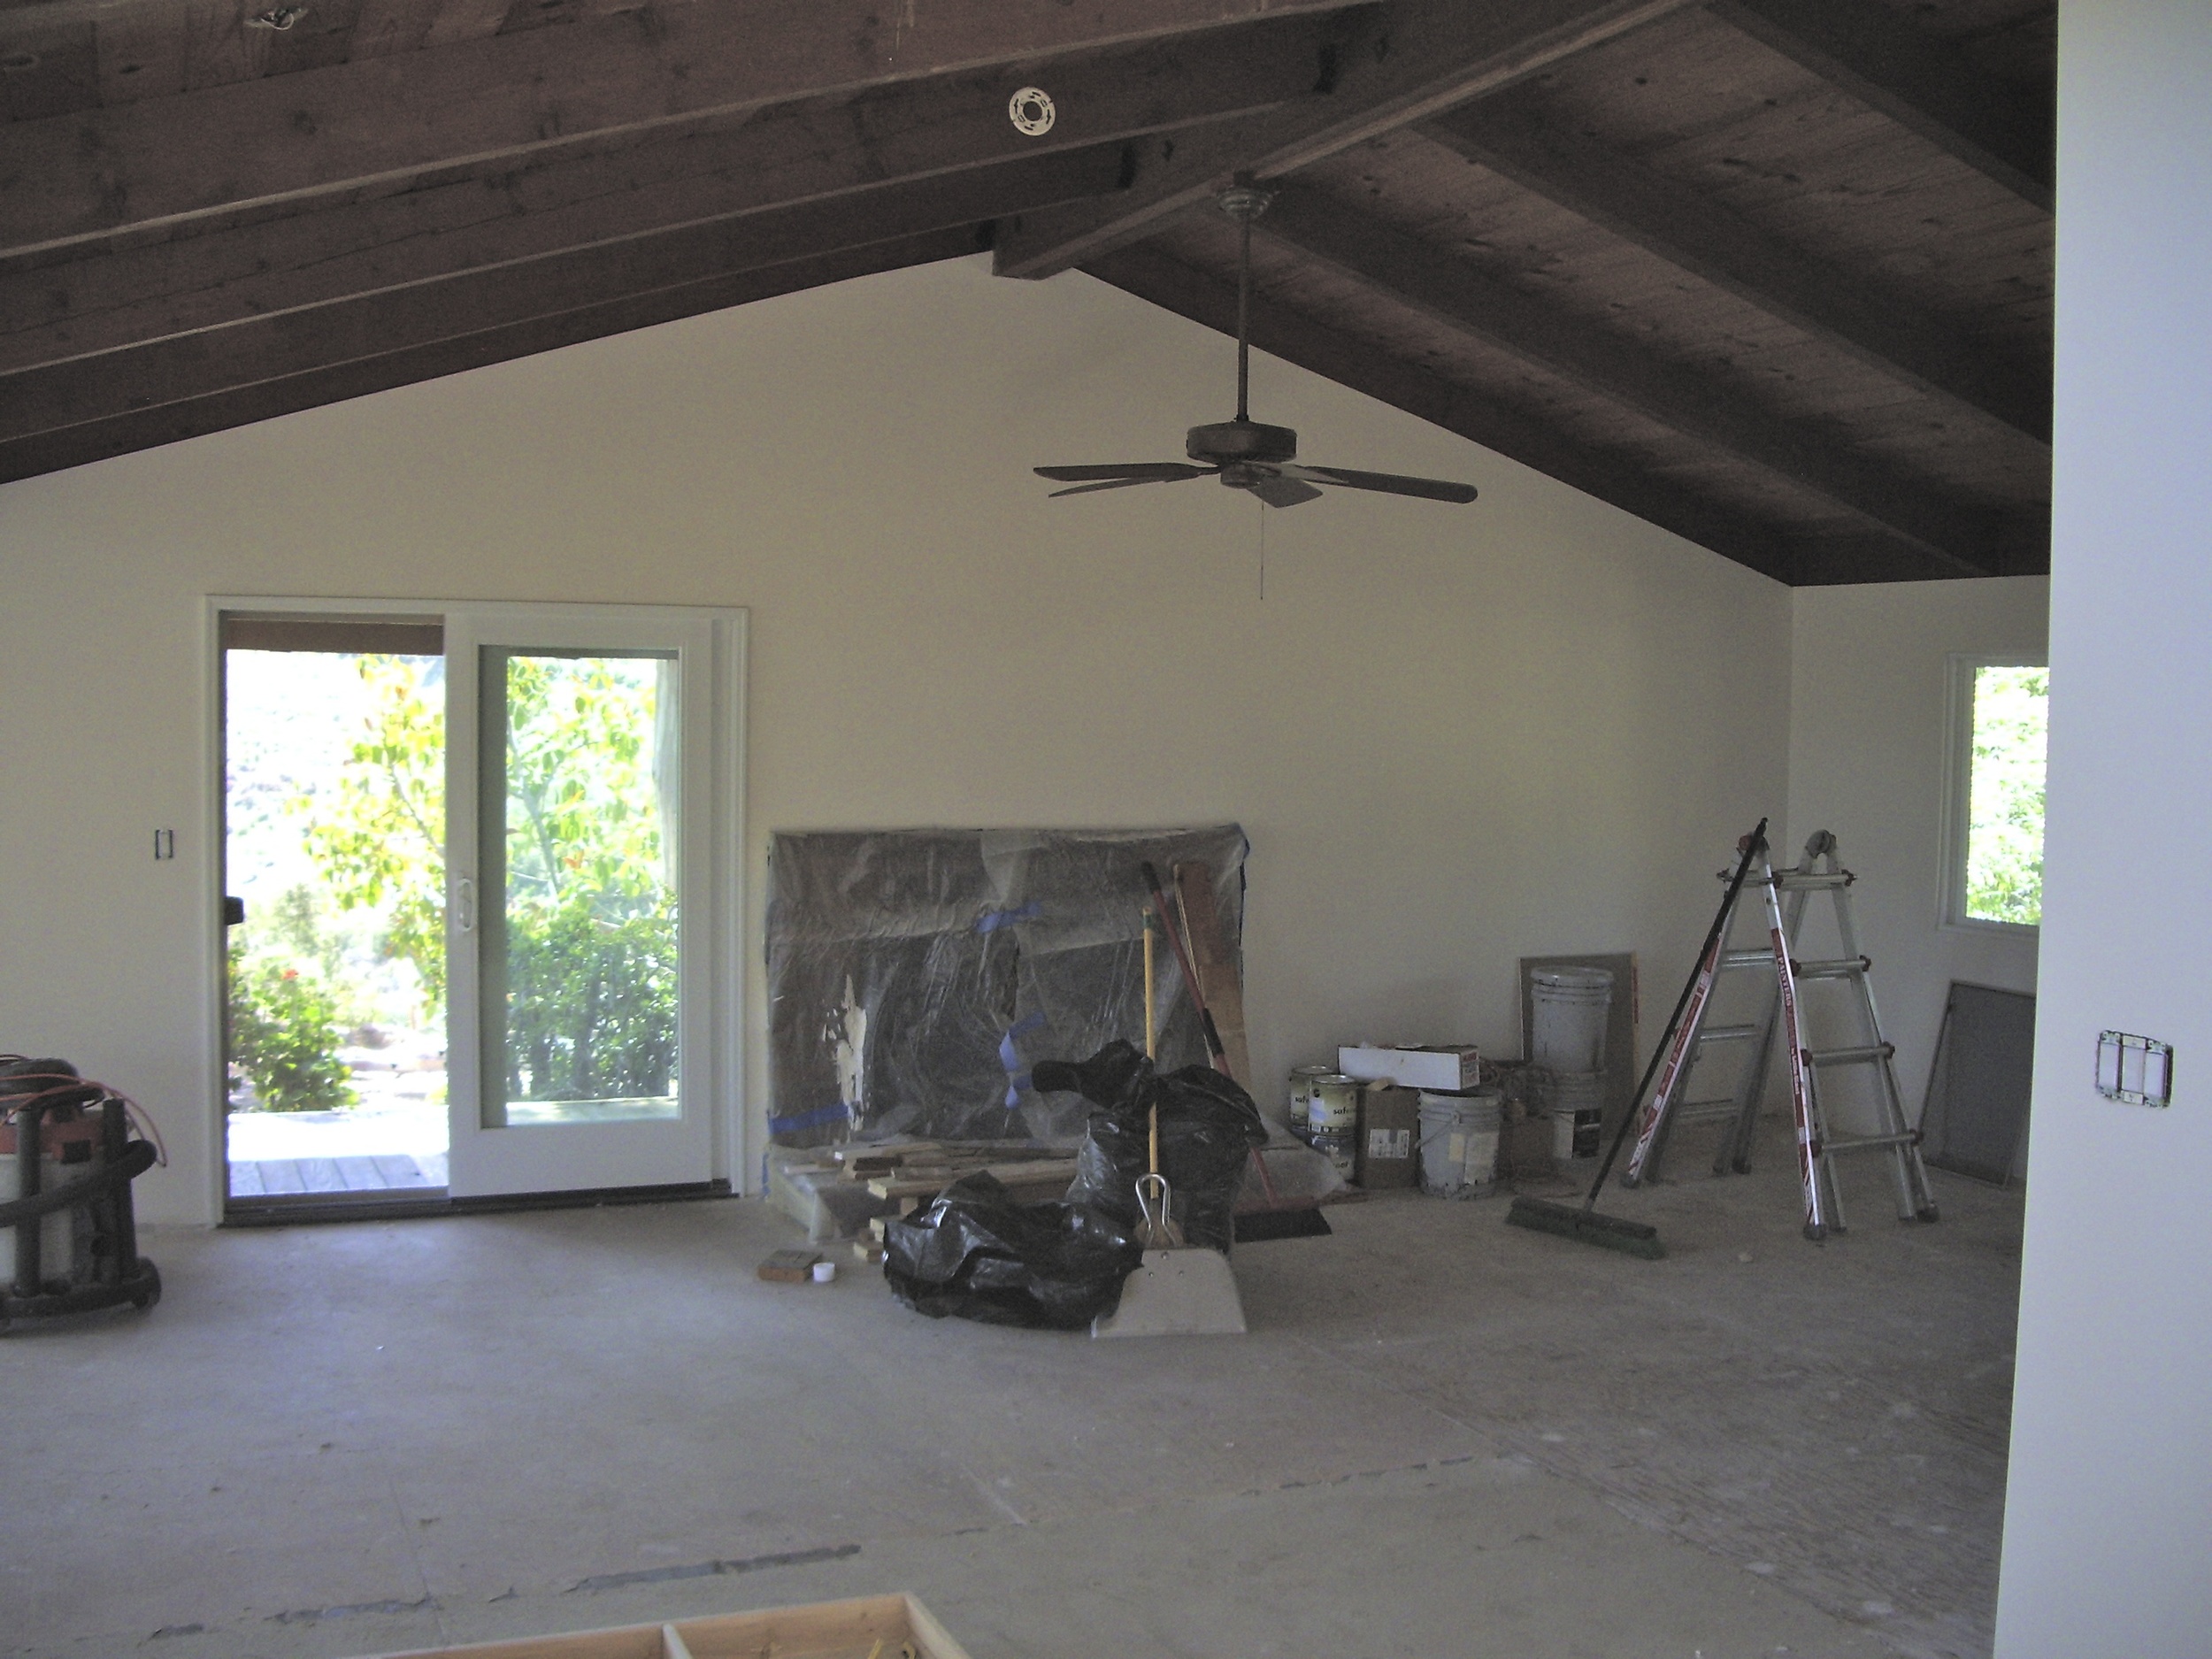  After: Light walls really make the wood&nbsp;ceilings come to life. 